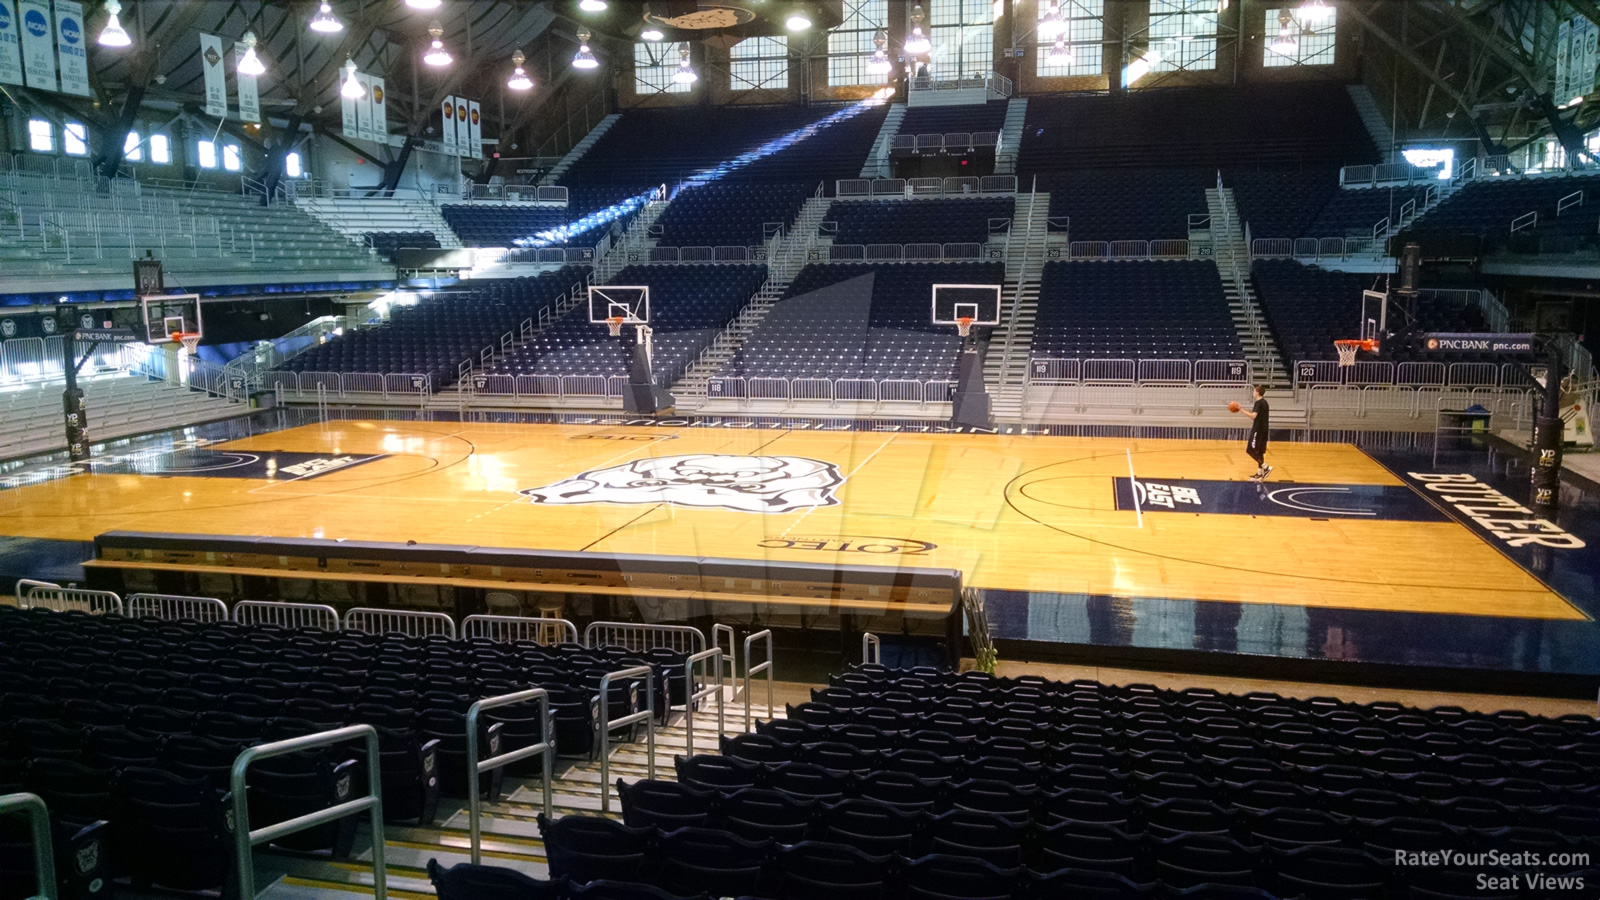 section 105, row 15 seat view  - hinkle fieldhouse